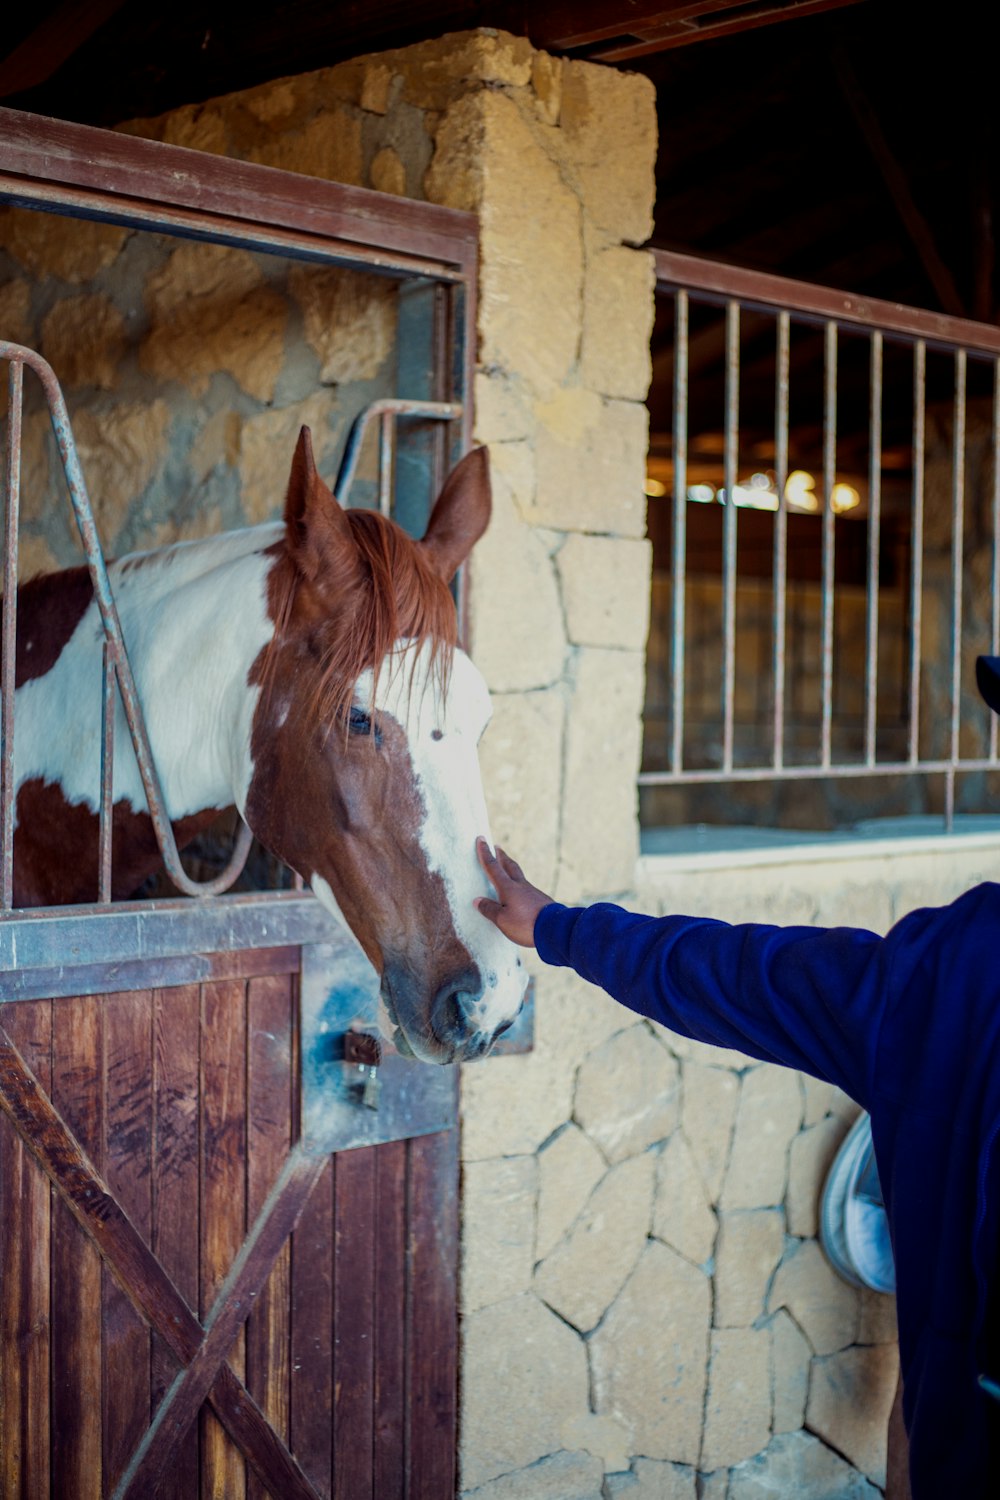 a man is petting a horse in a stable